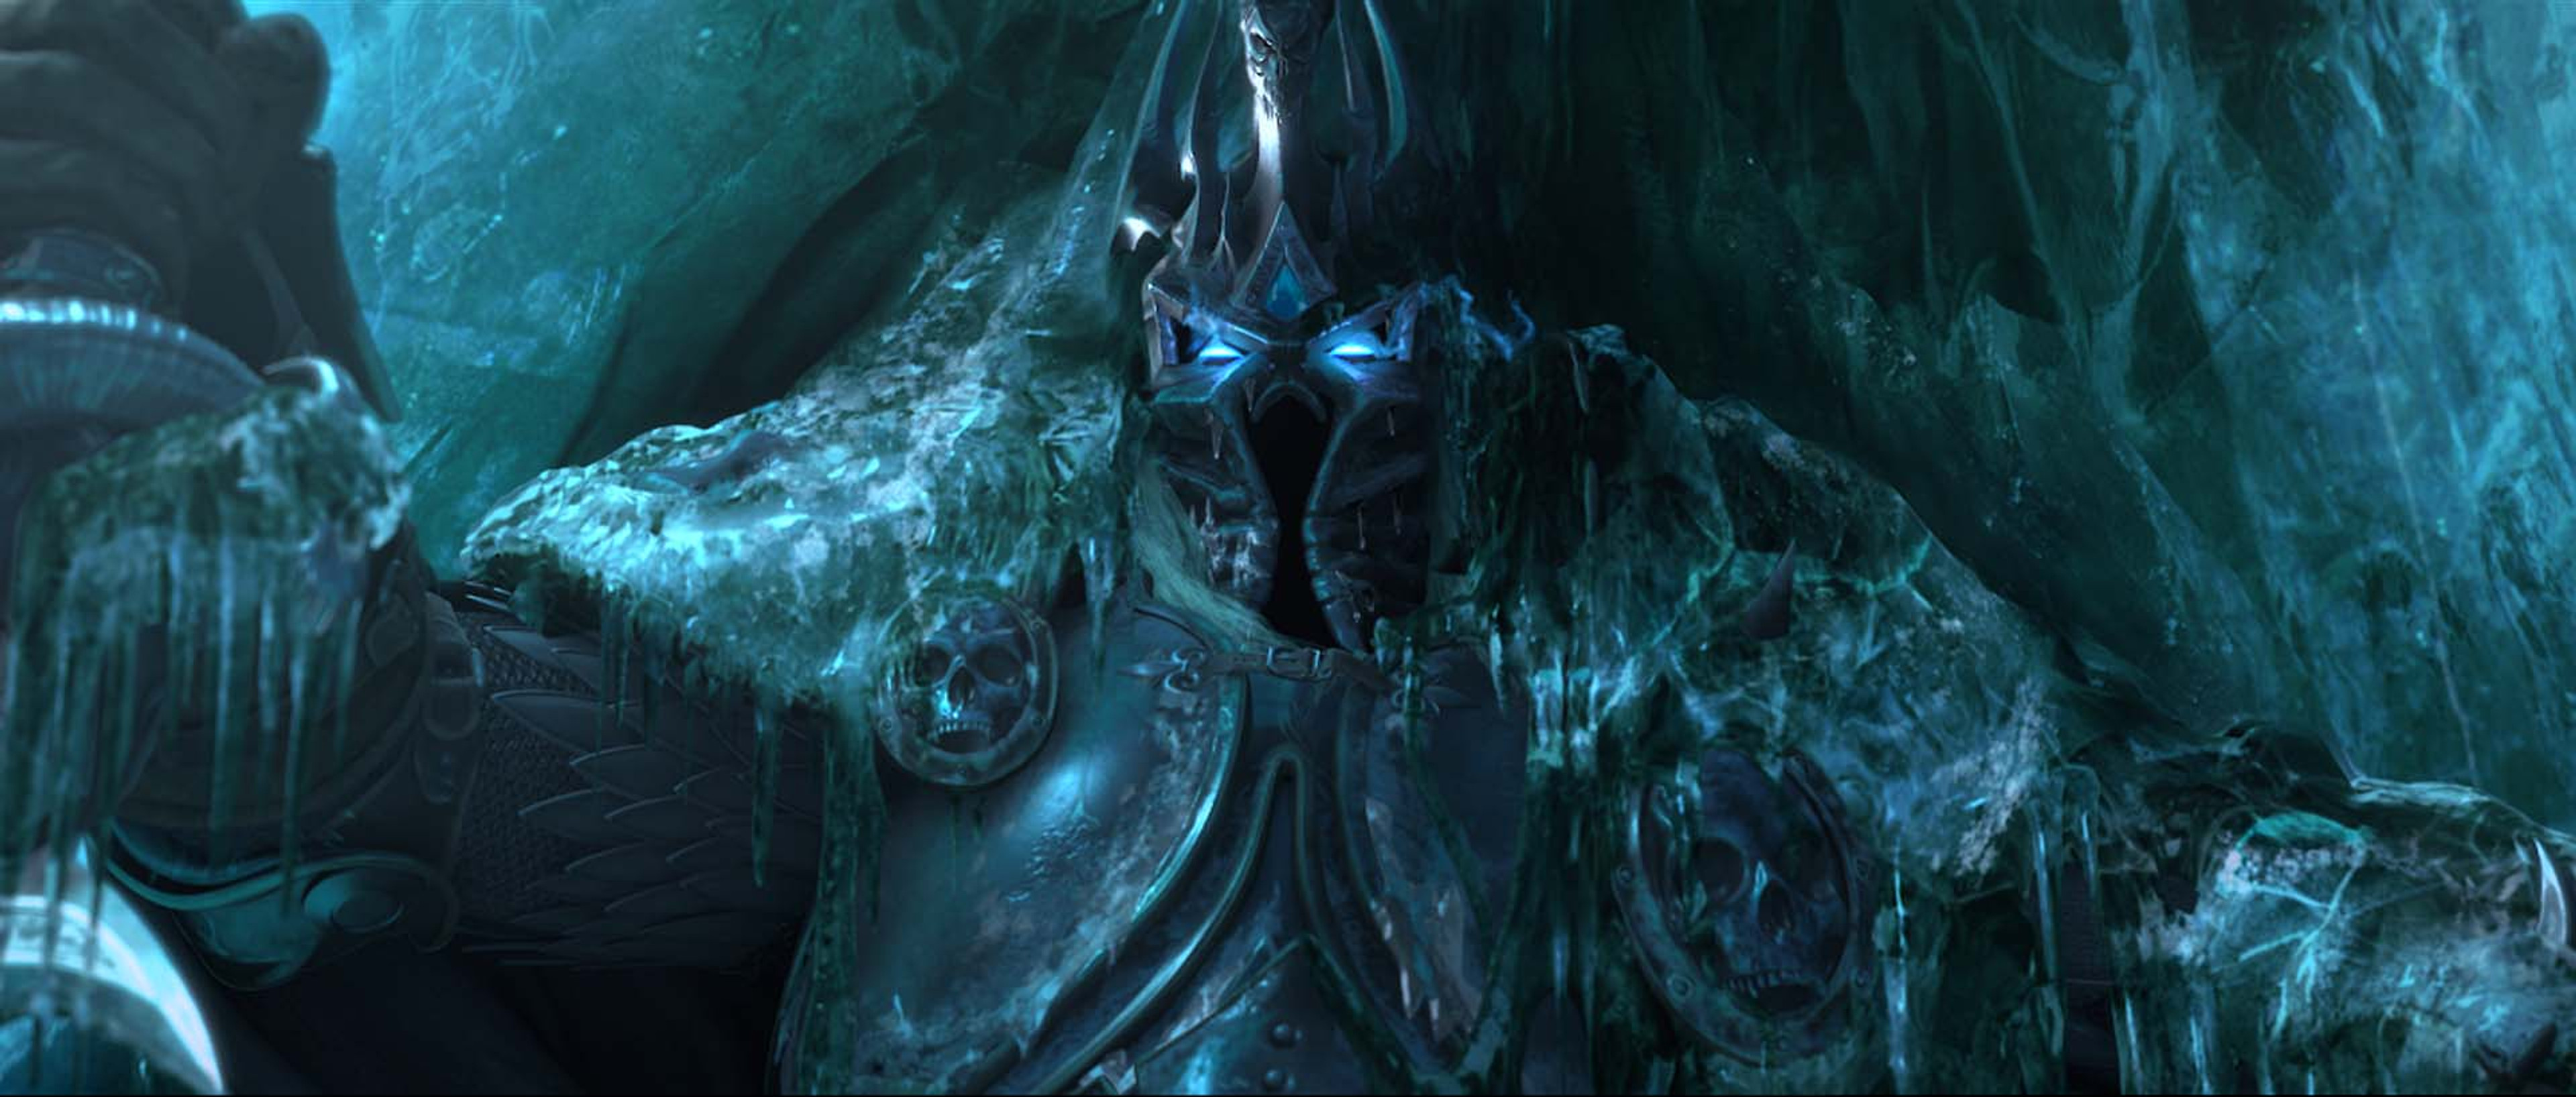 Wrath_of_the_Lich_King_Classic_Cinematic_Still__(3)